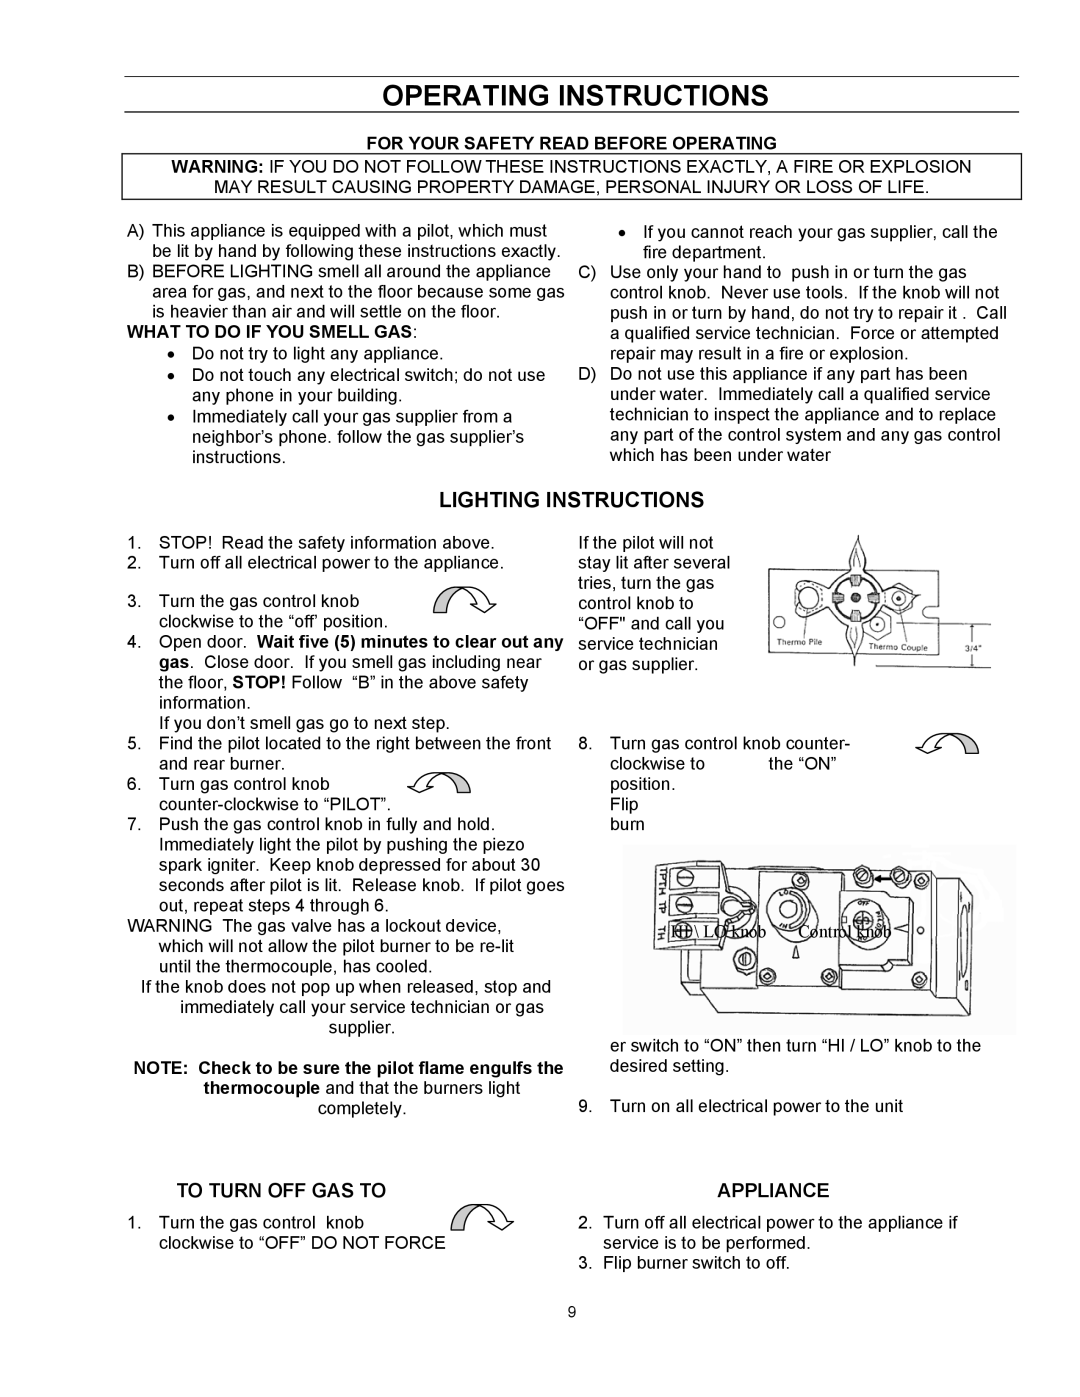 Enviro EG 40 B owner manual Operating Instructions, Lighting Instructions, For Your Safety Read Before Operating 